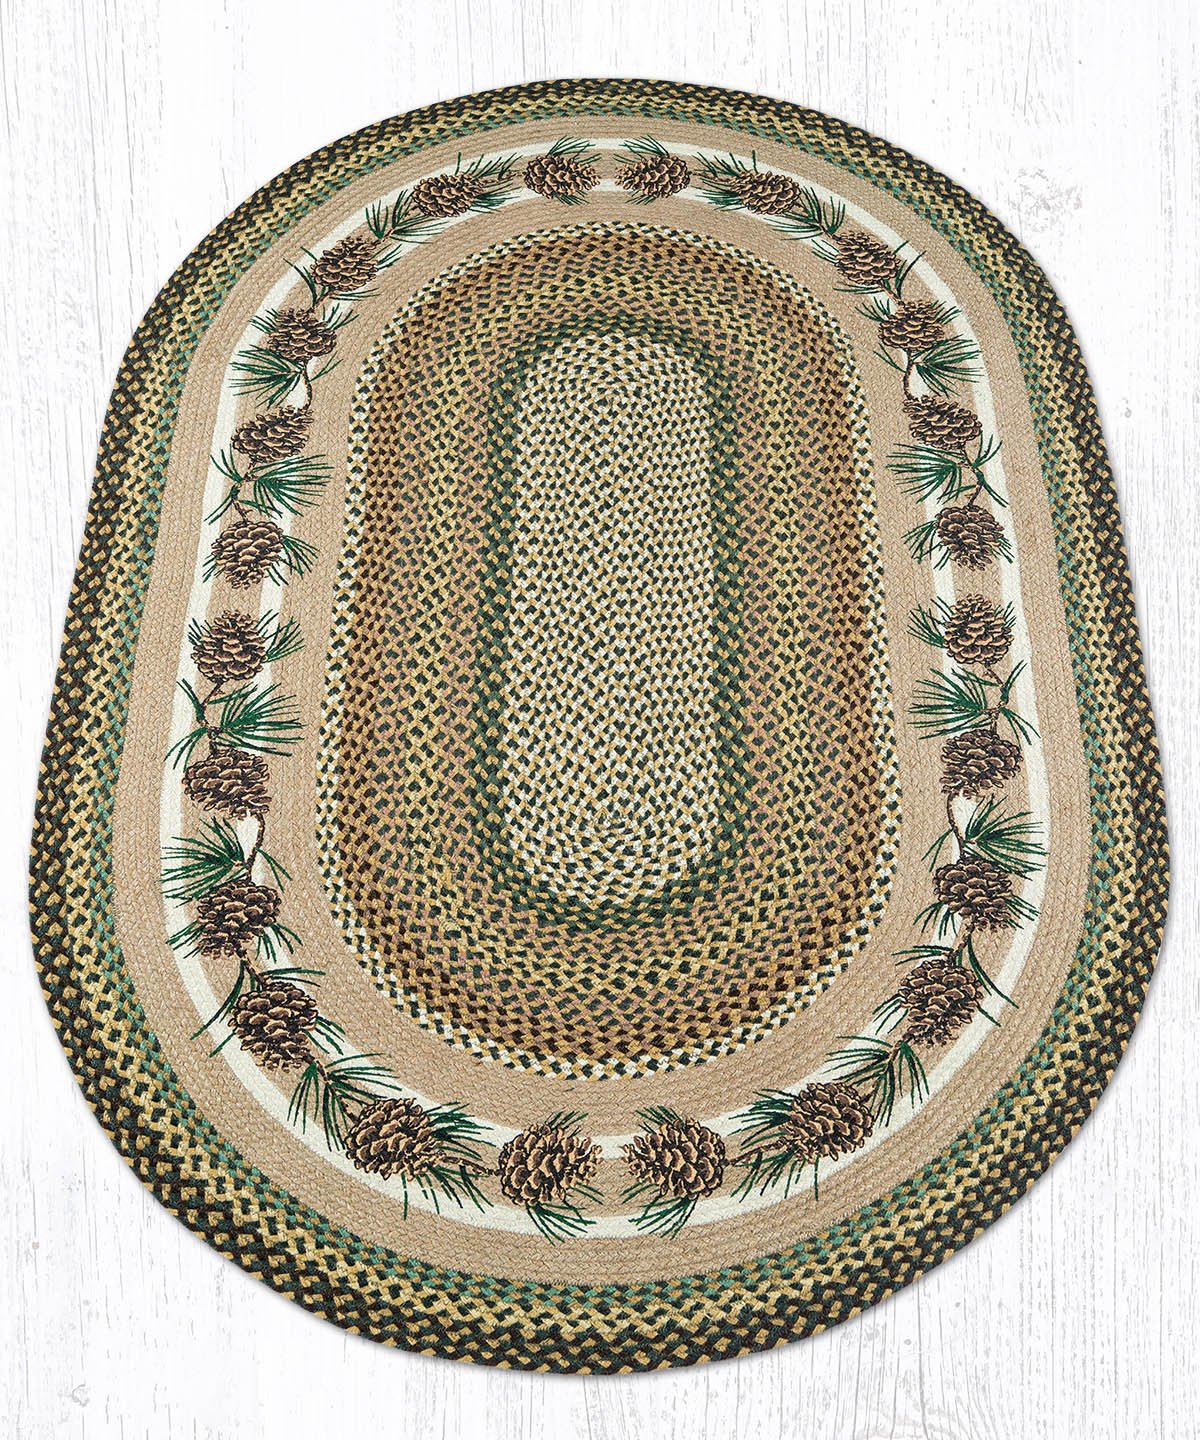 Needles & Cones Design Oval Braided Rug 4'x6'  - Earth Rugs